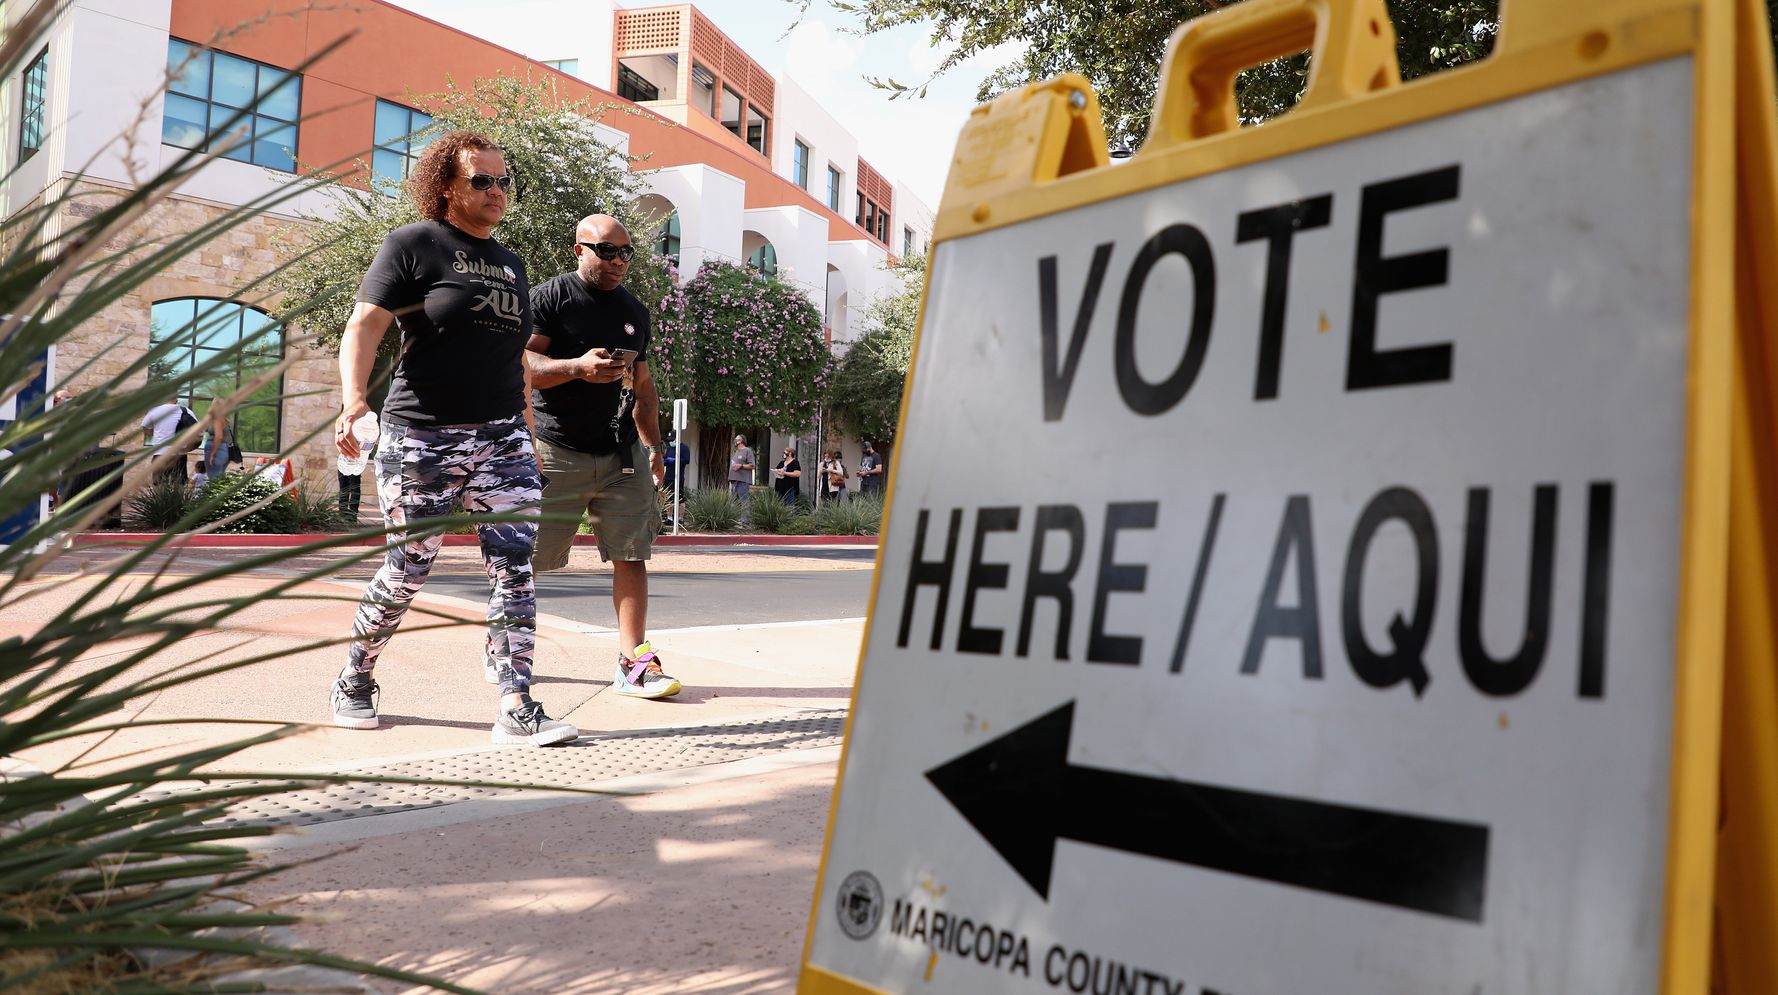 Arizona Gov. Signs Bill To Purge Early Voters Who Don't Vote By Mail In 2 Election Cycles